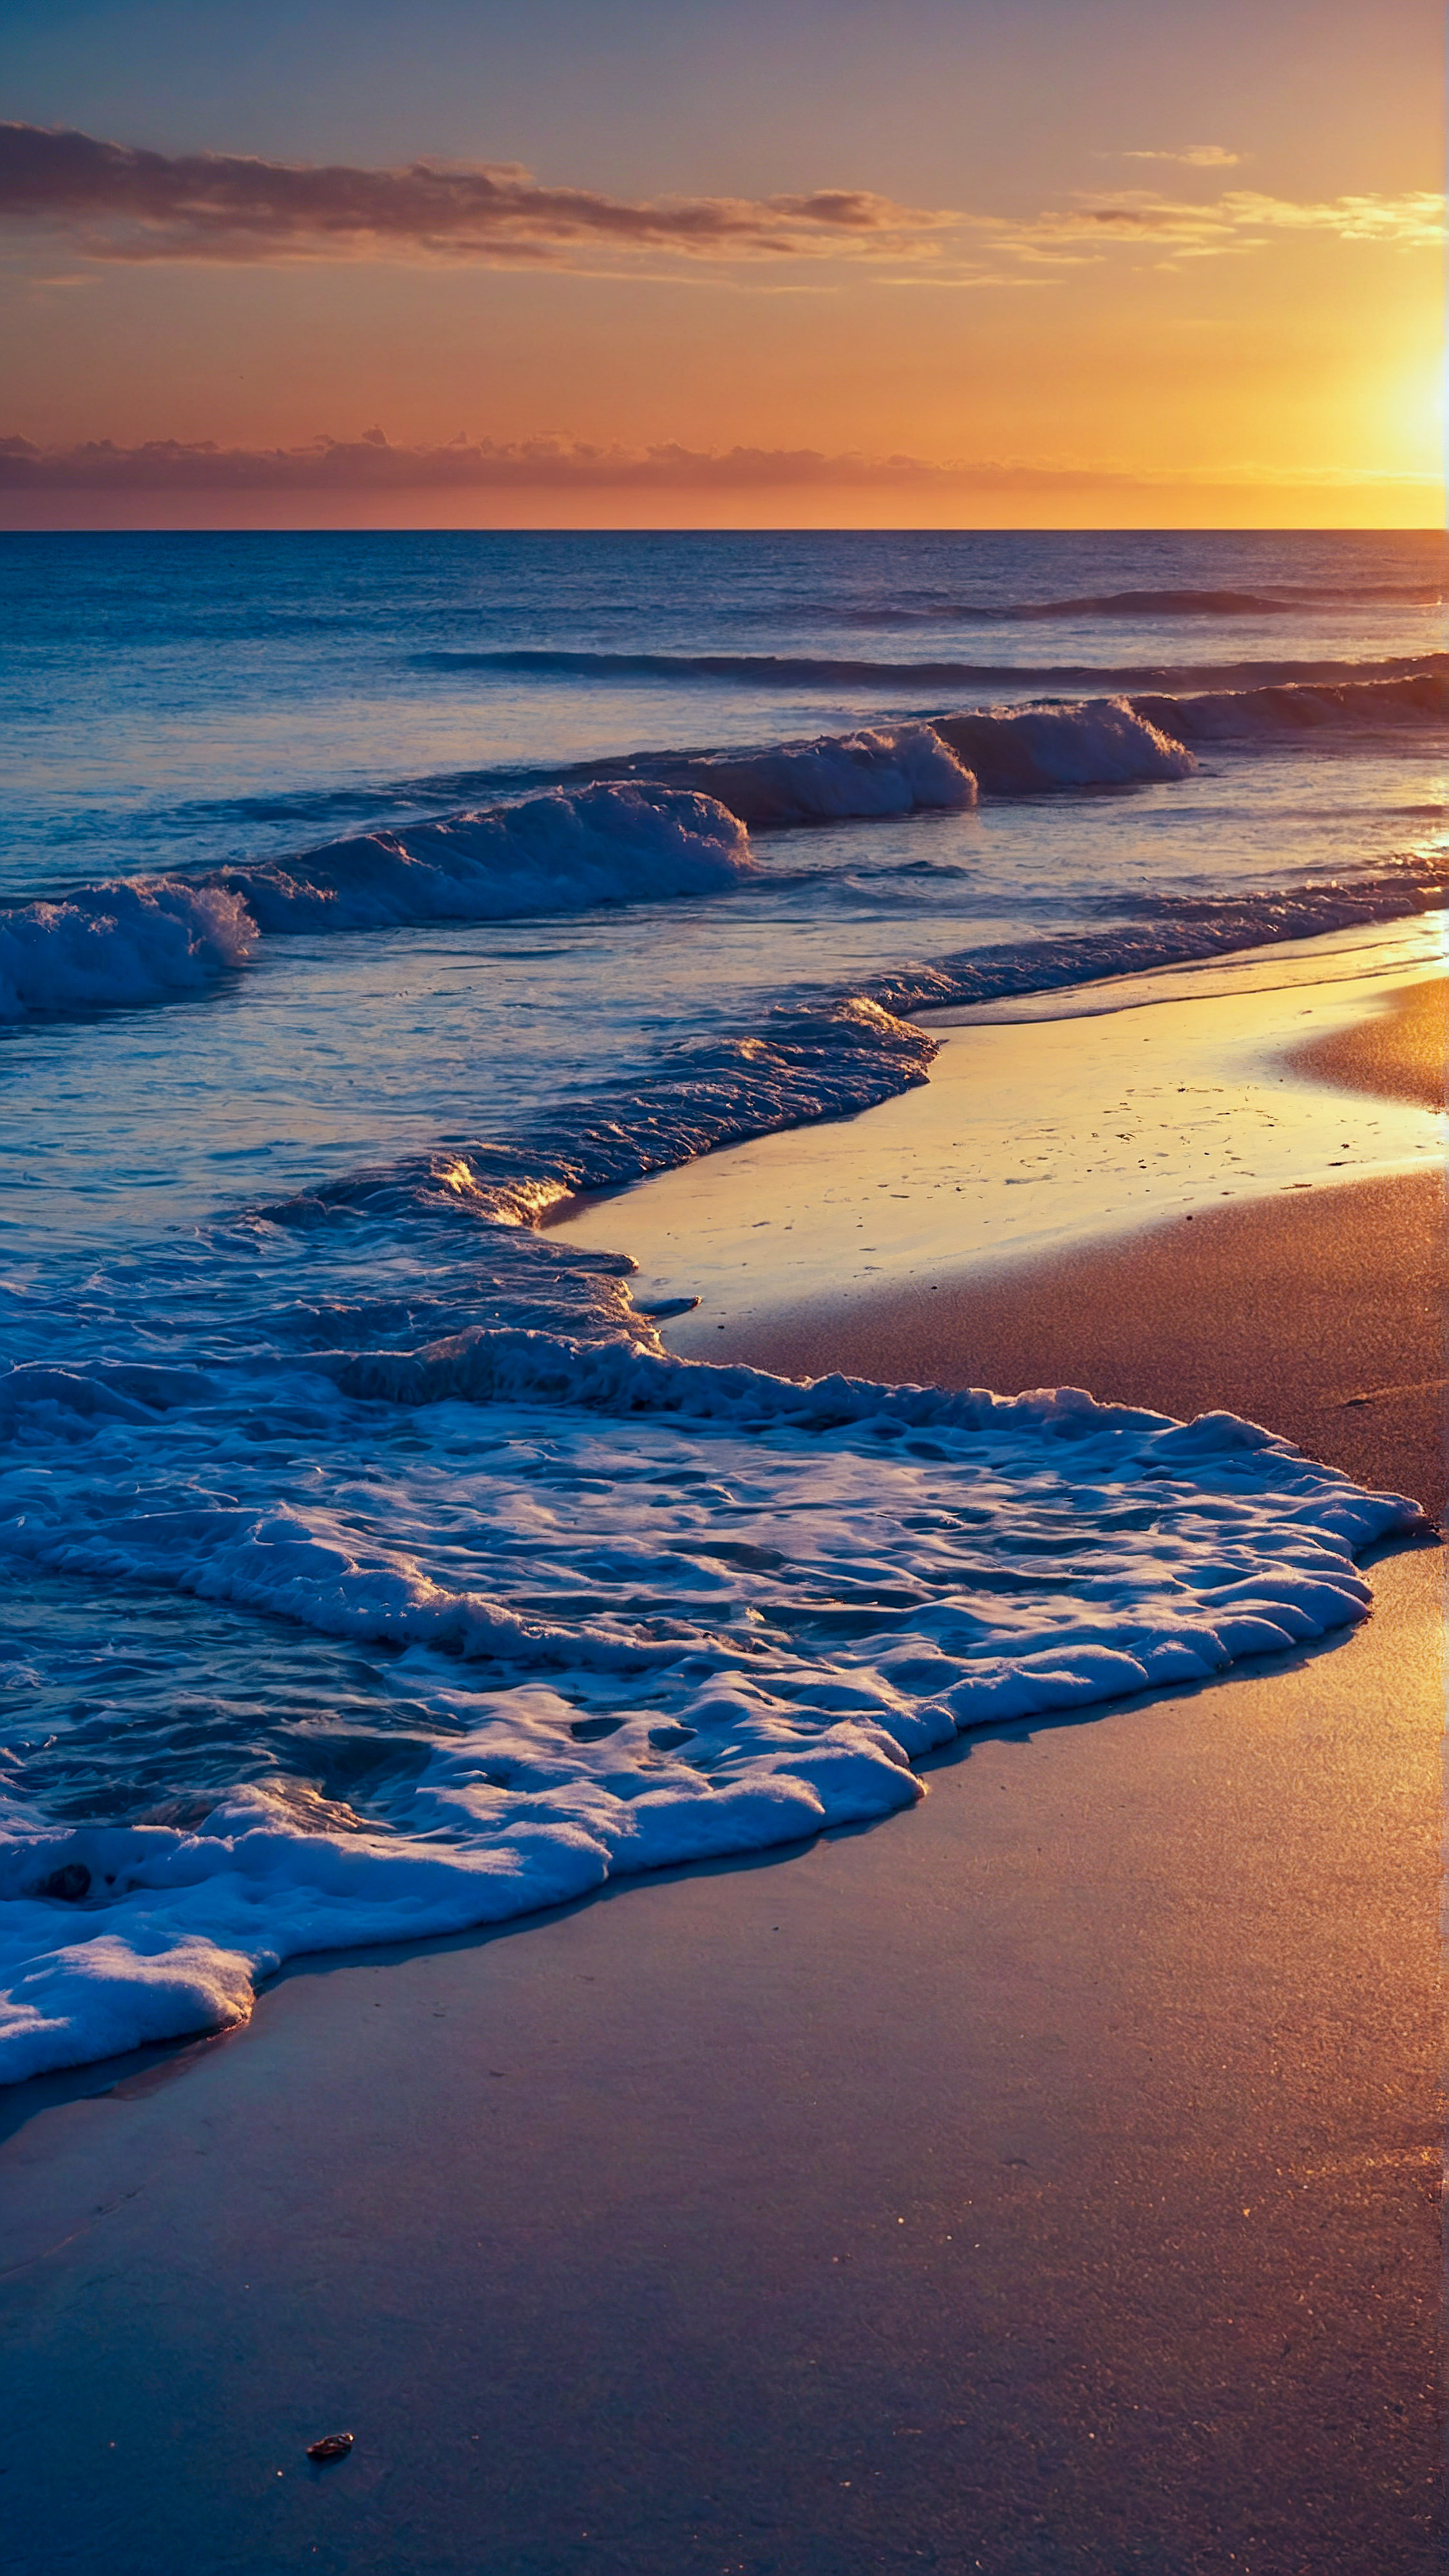 Get lost in the magic of our cool pictures for iPhone wallpaper, depicting a serene beach at sunset, with the golden sun dipping below the horizon.